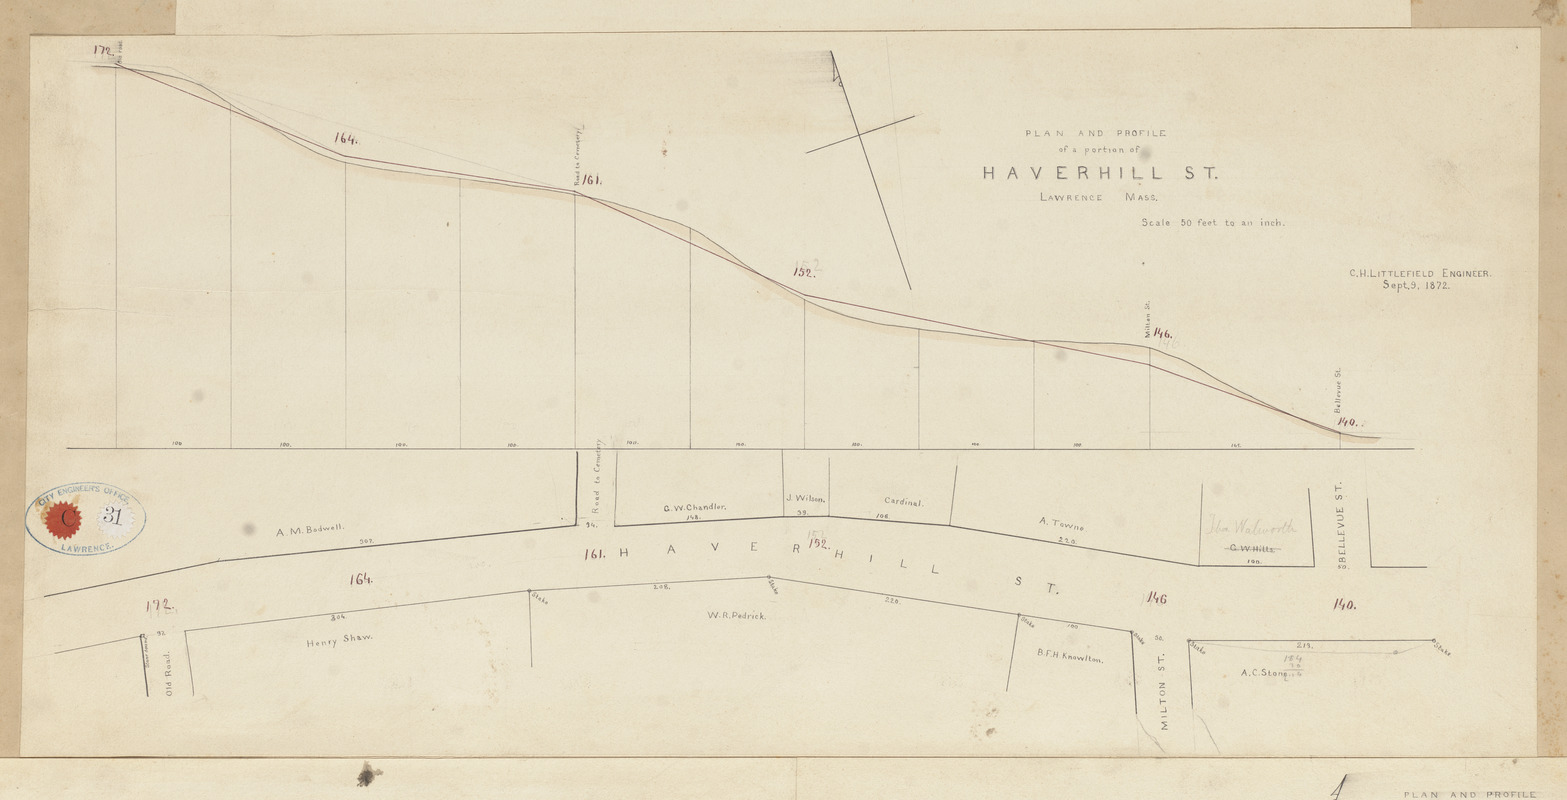 Plan And Profile Of A Portion Of Haverhill St Lawrence Mass Digital Commonwealth 0381